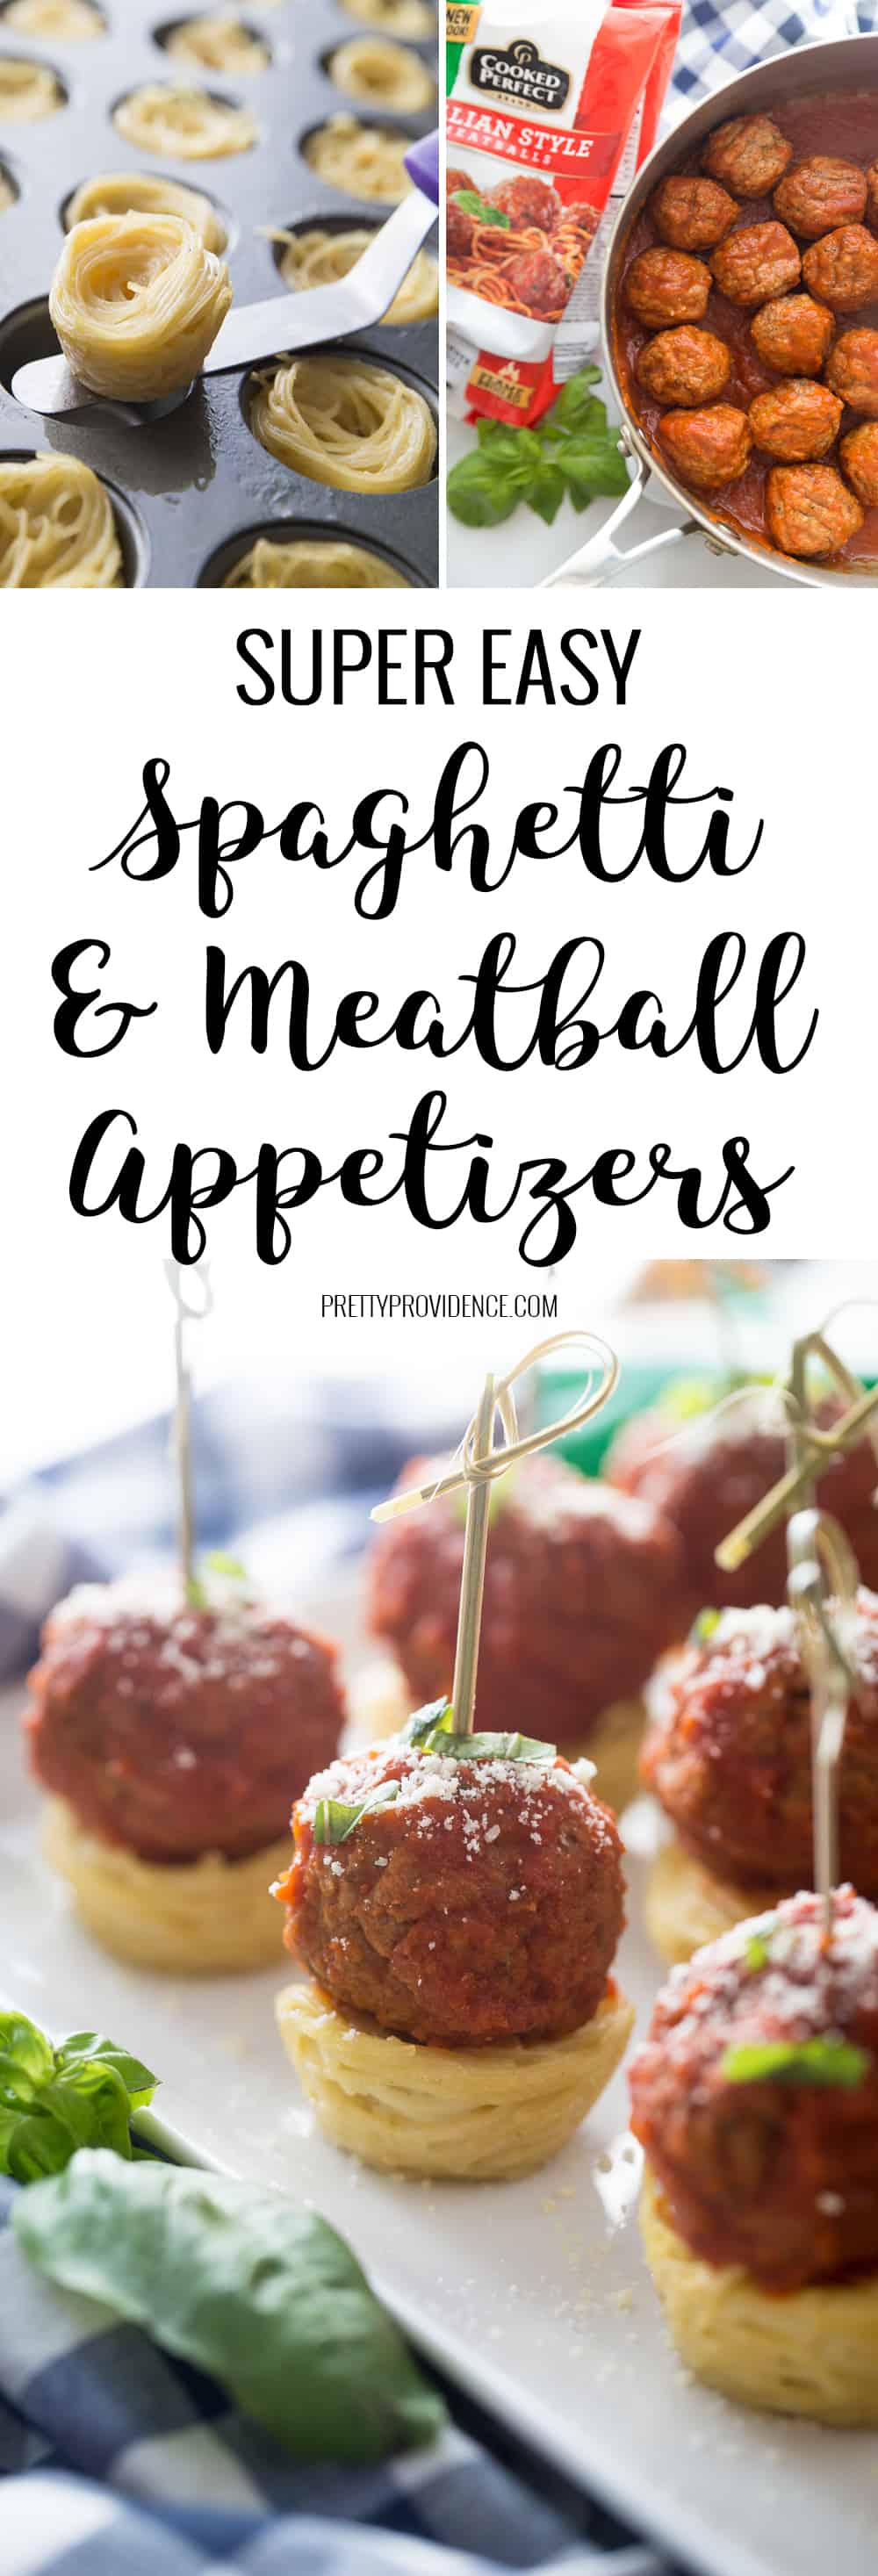 Easy Spaghetti and Meatball Appetizers by Pretty Providence